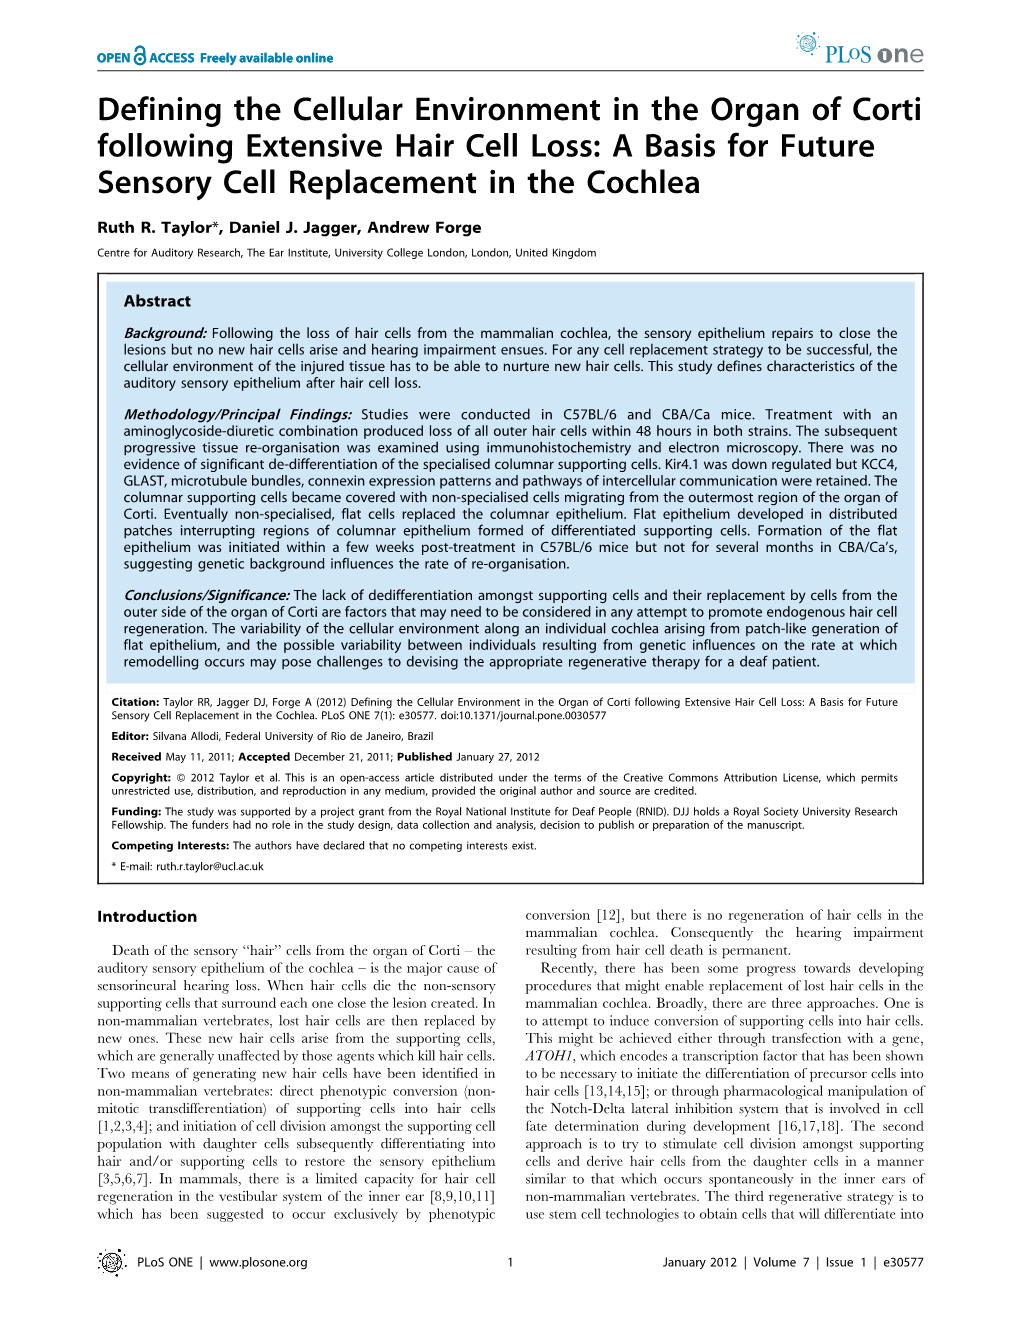 A Basis for Future Sensory Cell Replacement in the Cochlea